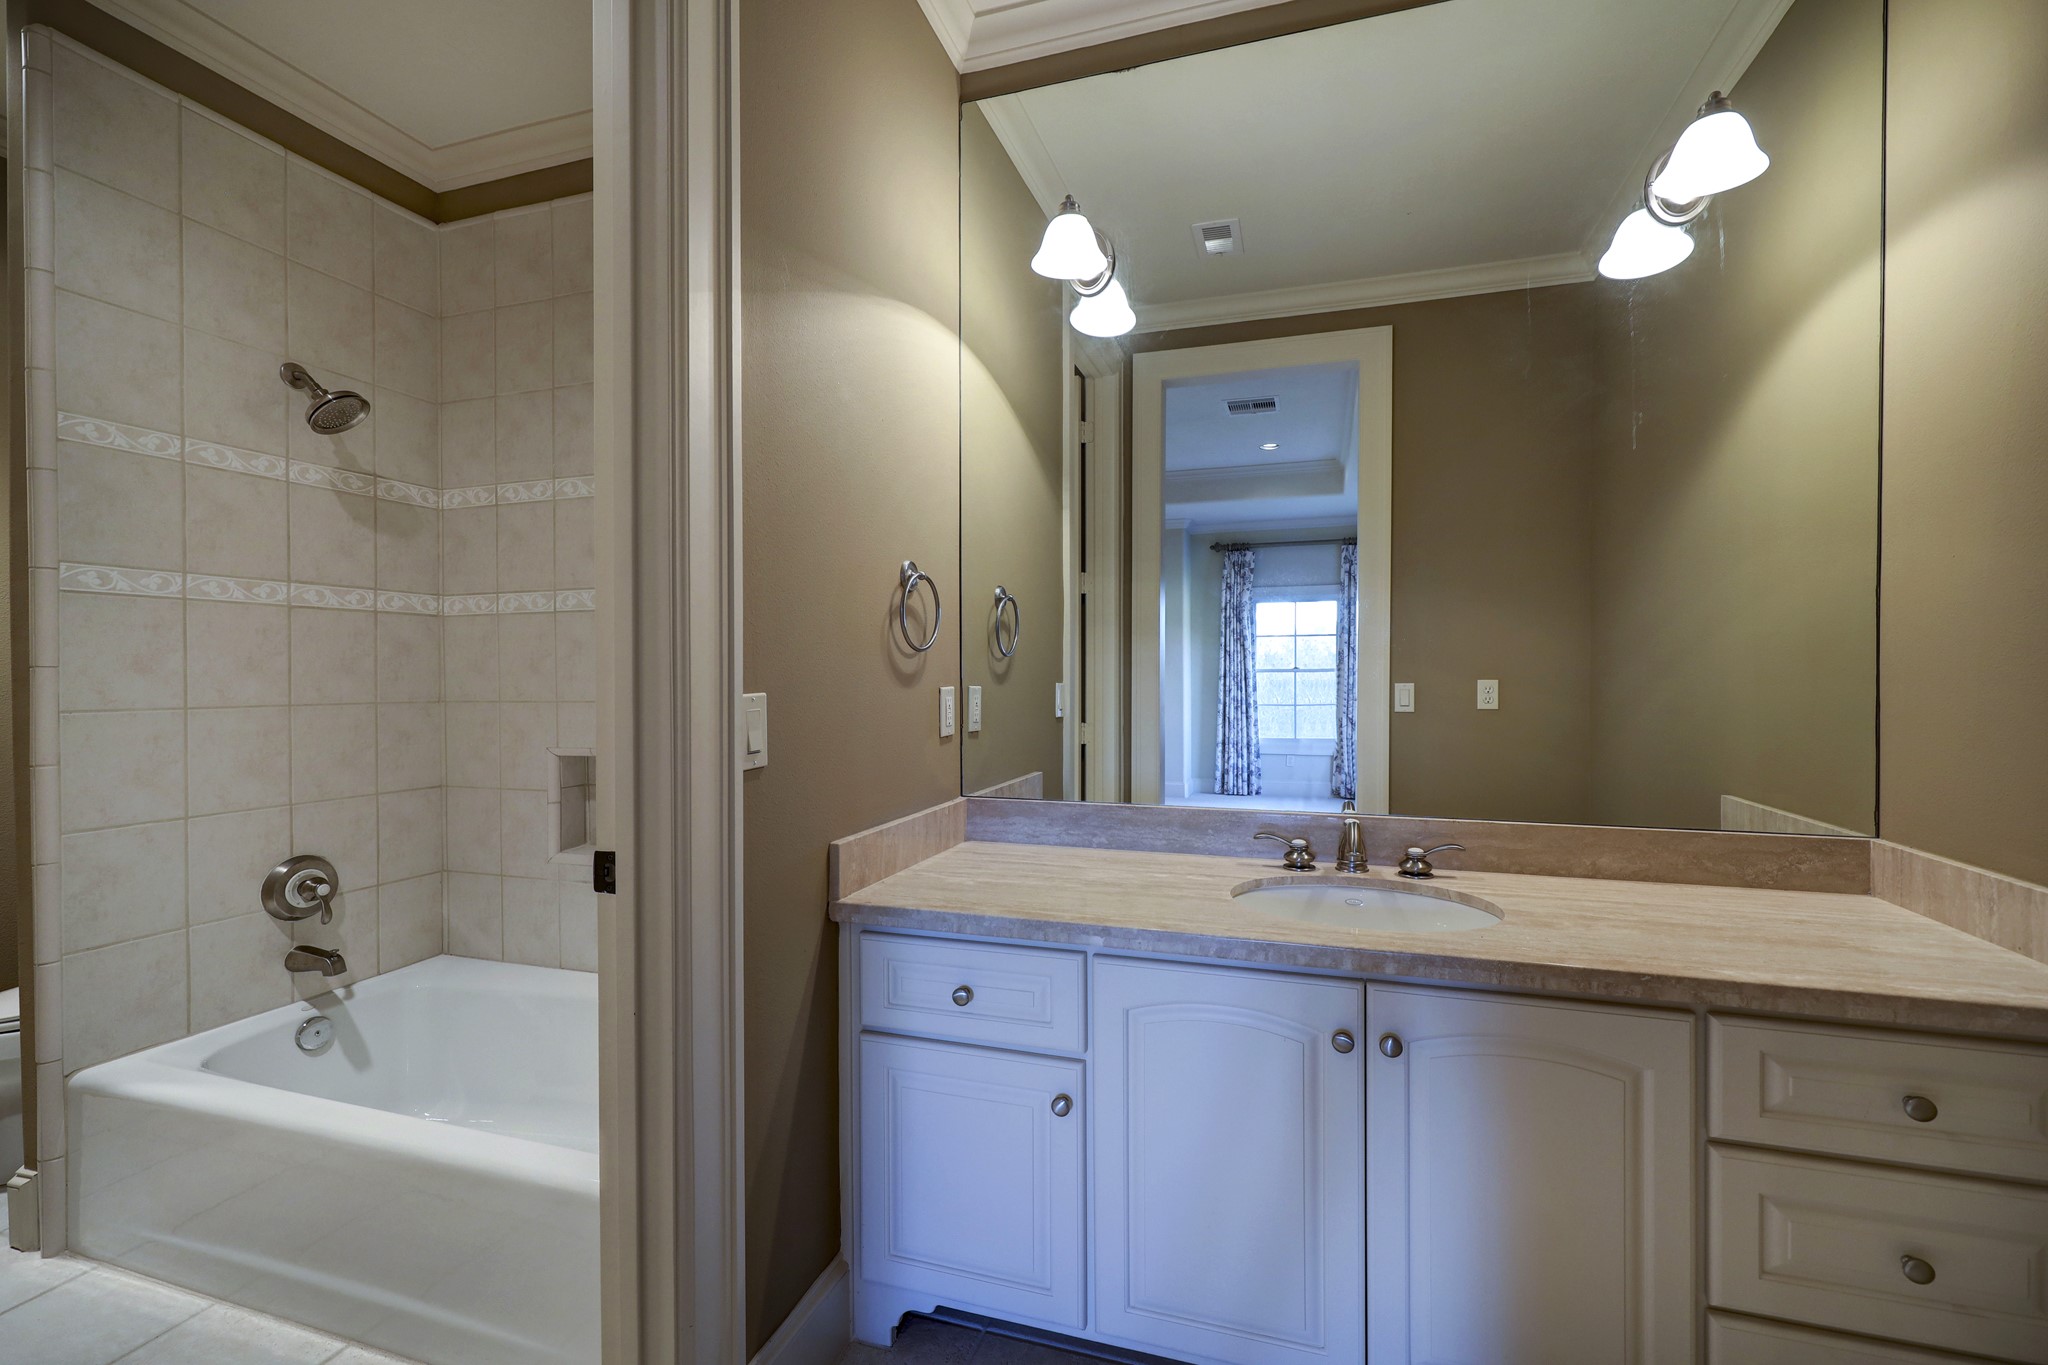 A convenient powder room serves the upstairs living spaces.